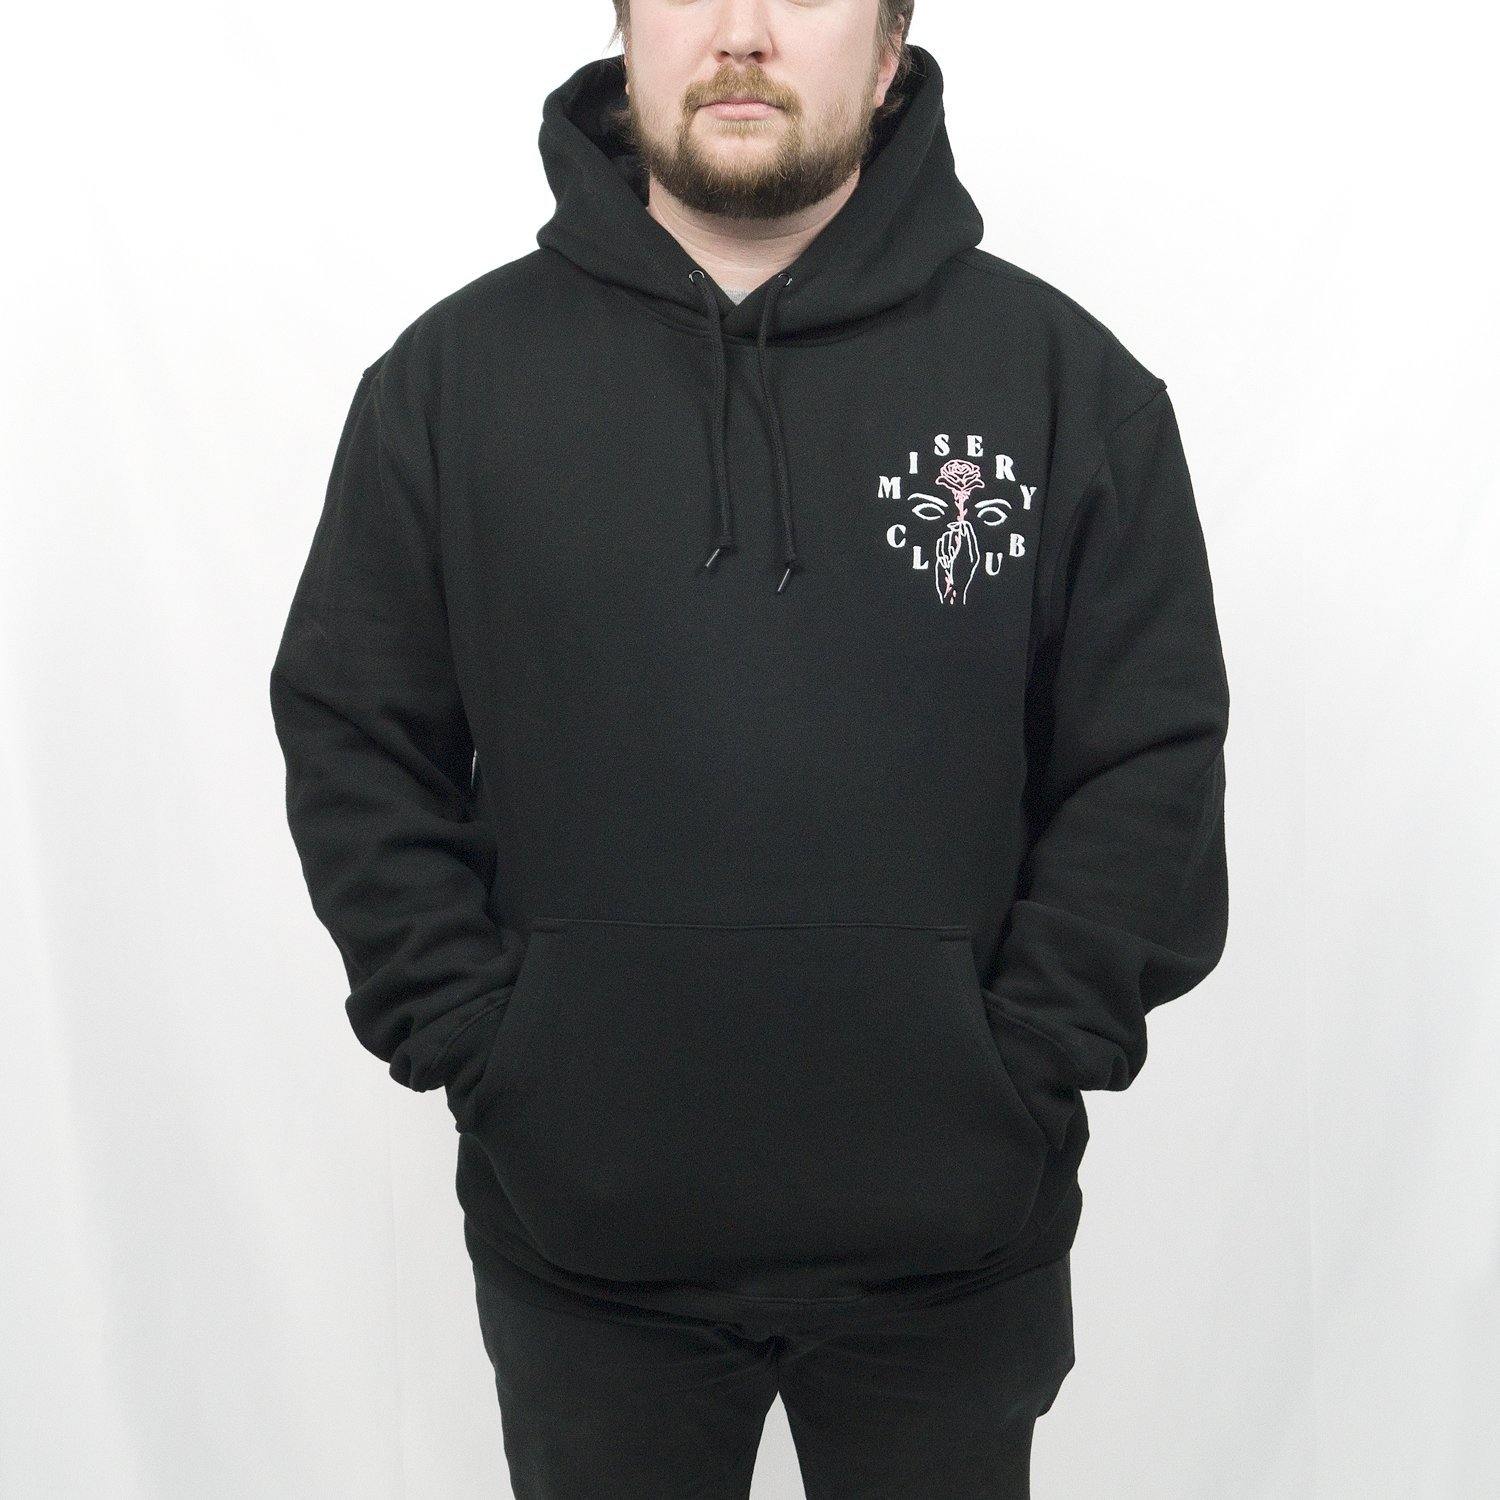 Buy – Zubin "Barbed Wire Flowers" Hoodie – Band & Music Merch – Cold Cuts Merch